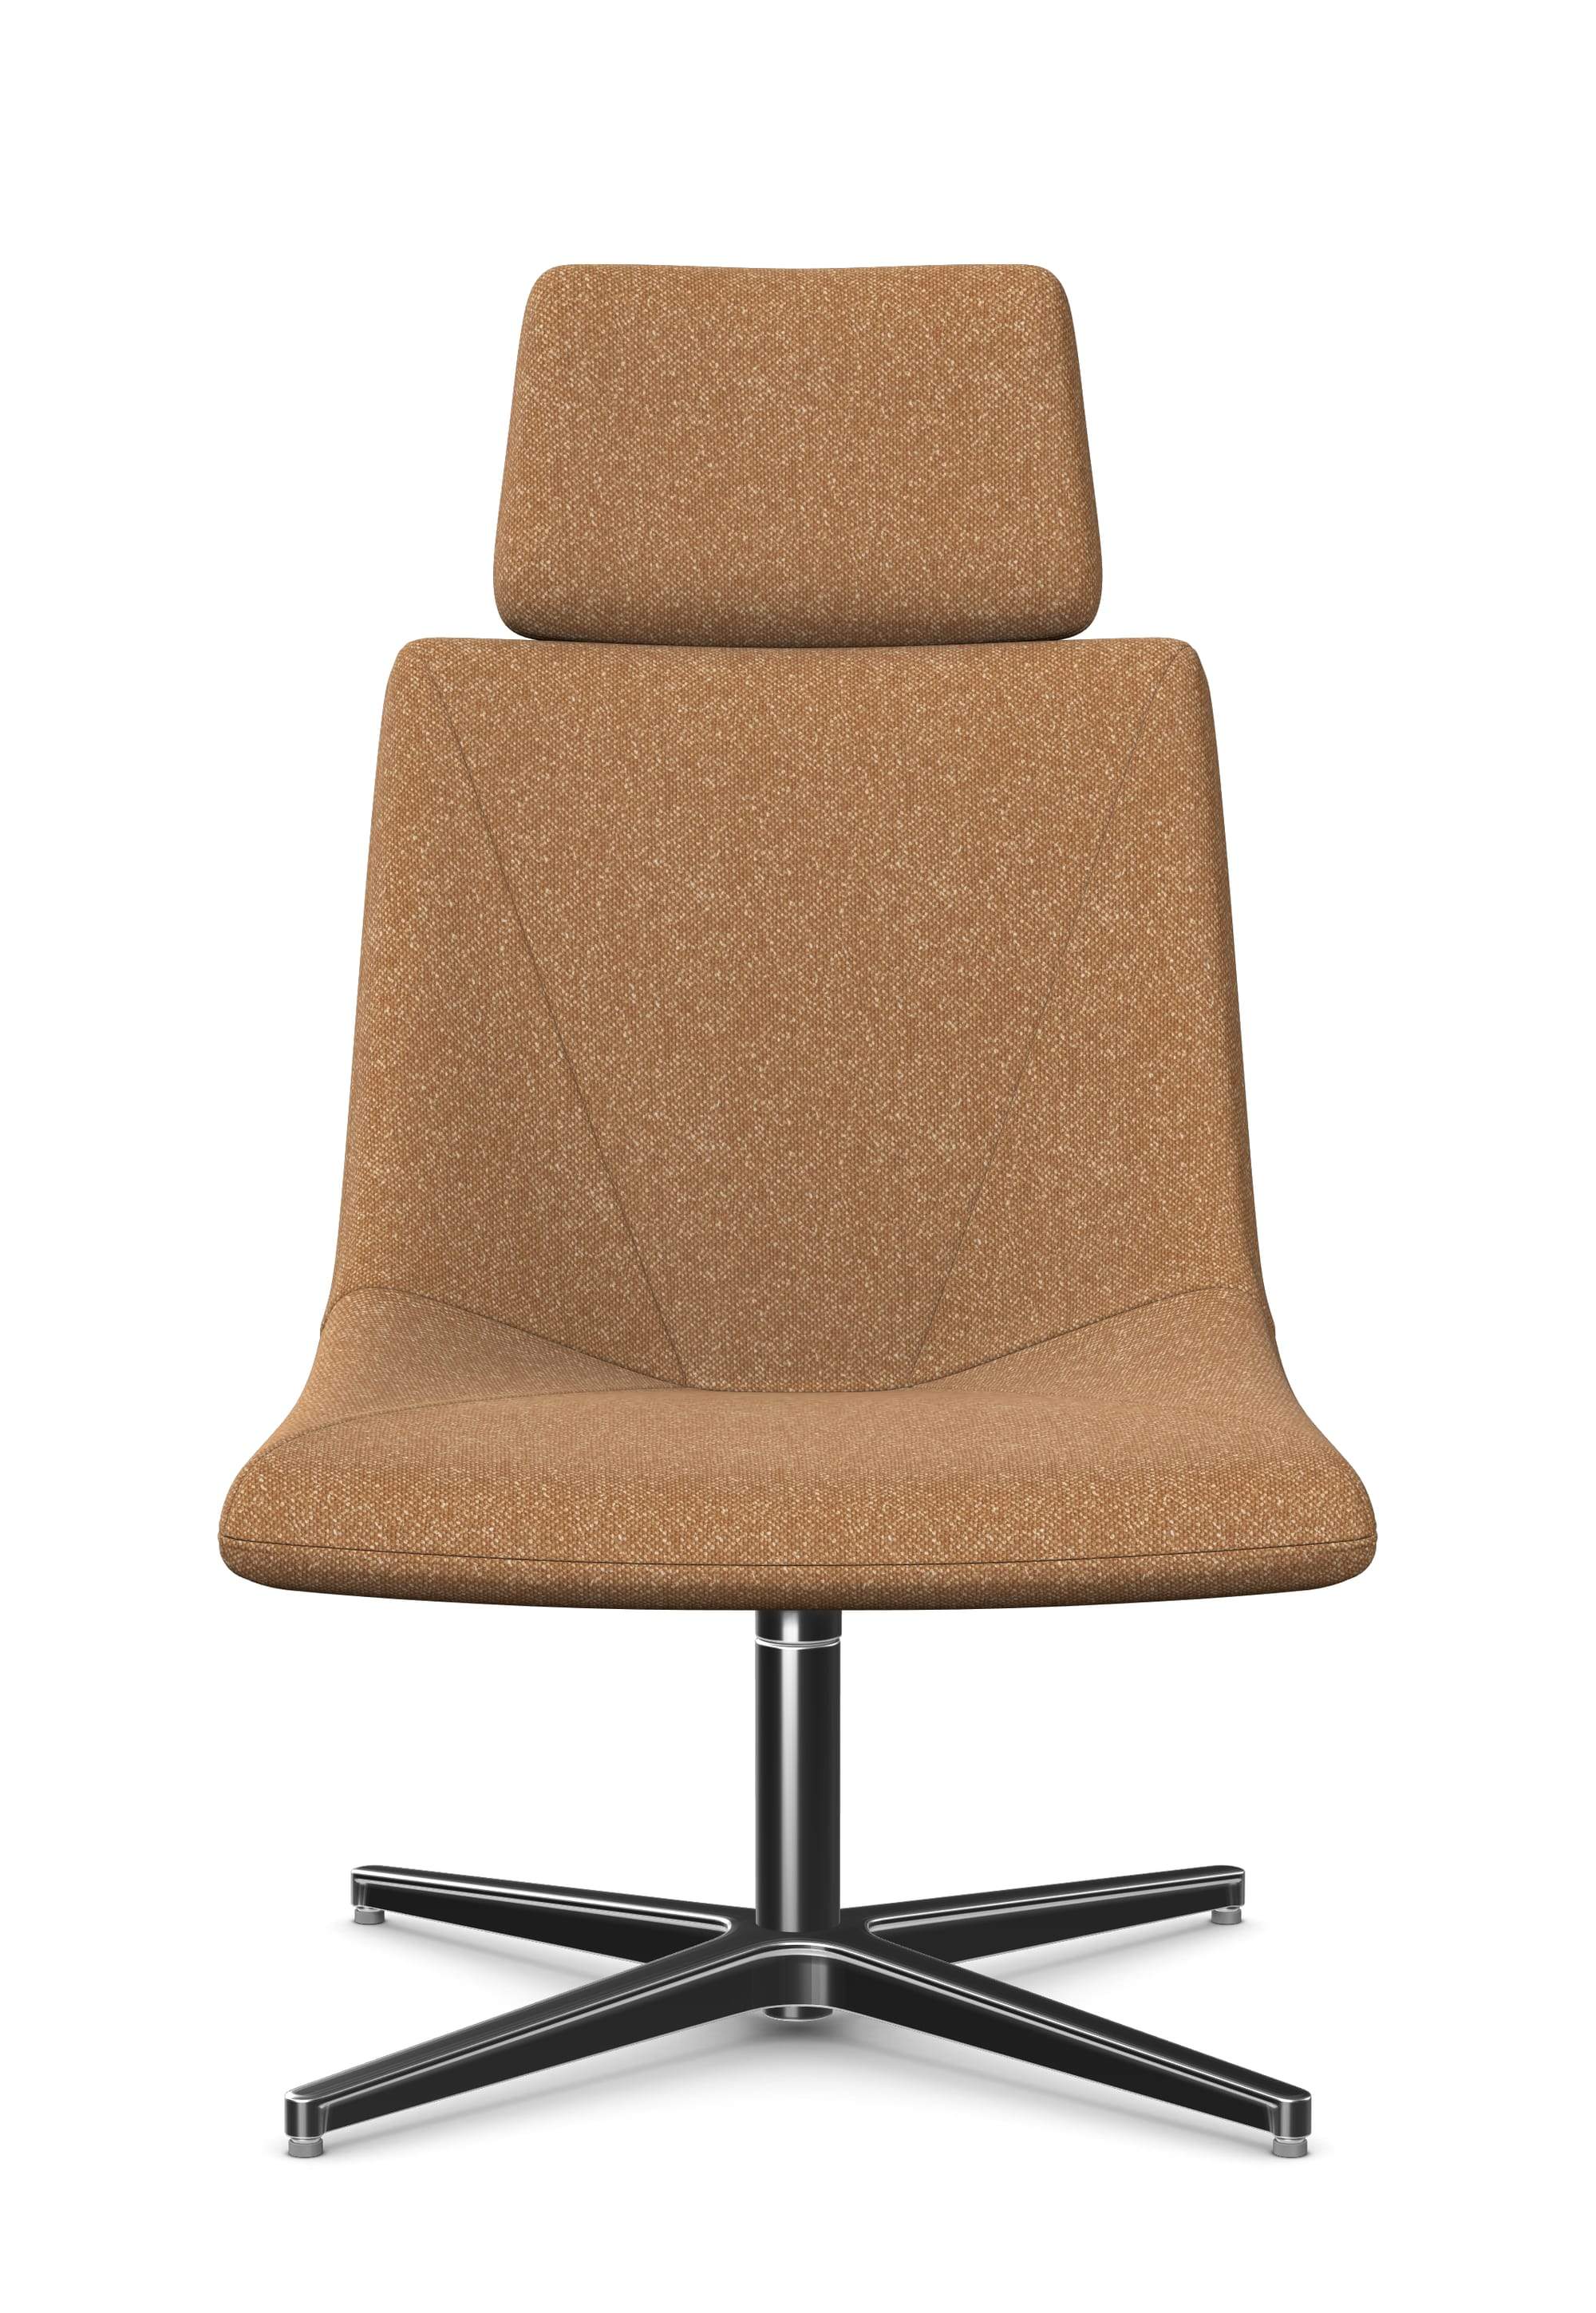 REMI - Extra Large Chair with Headrest, 4 Star Aluminium Base